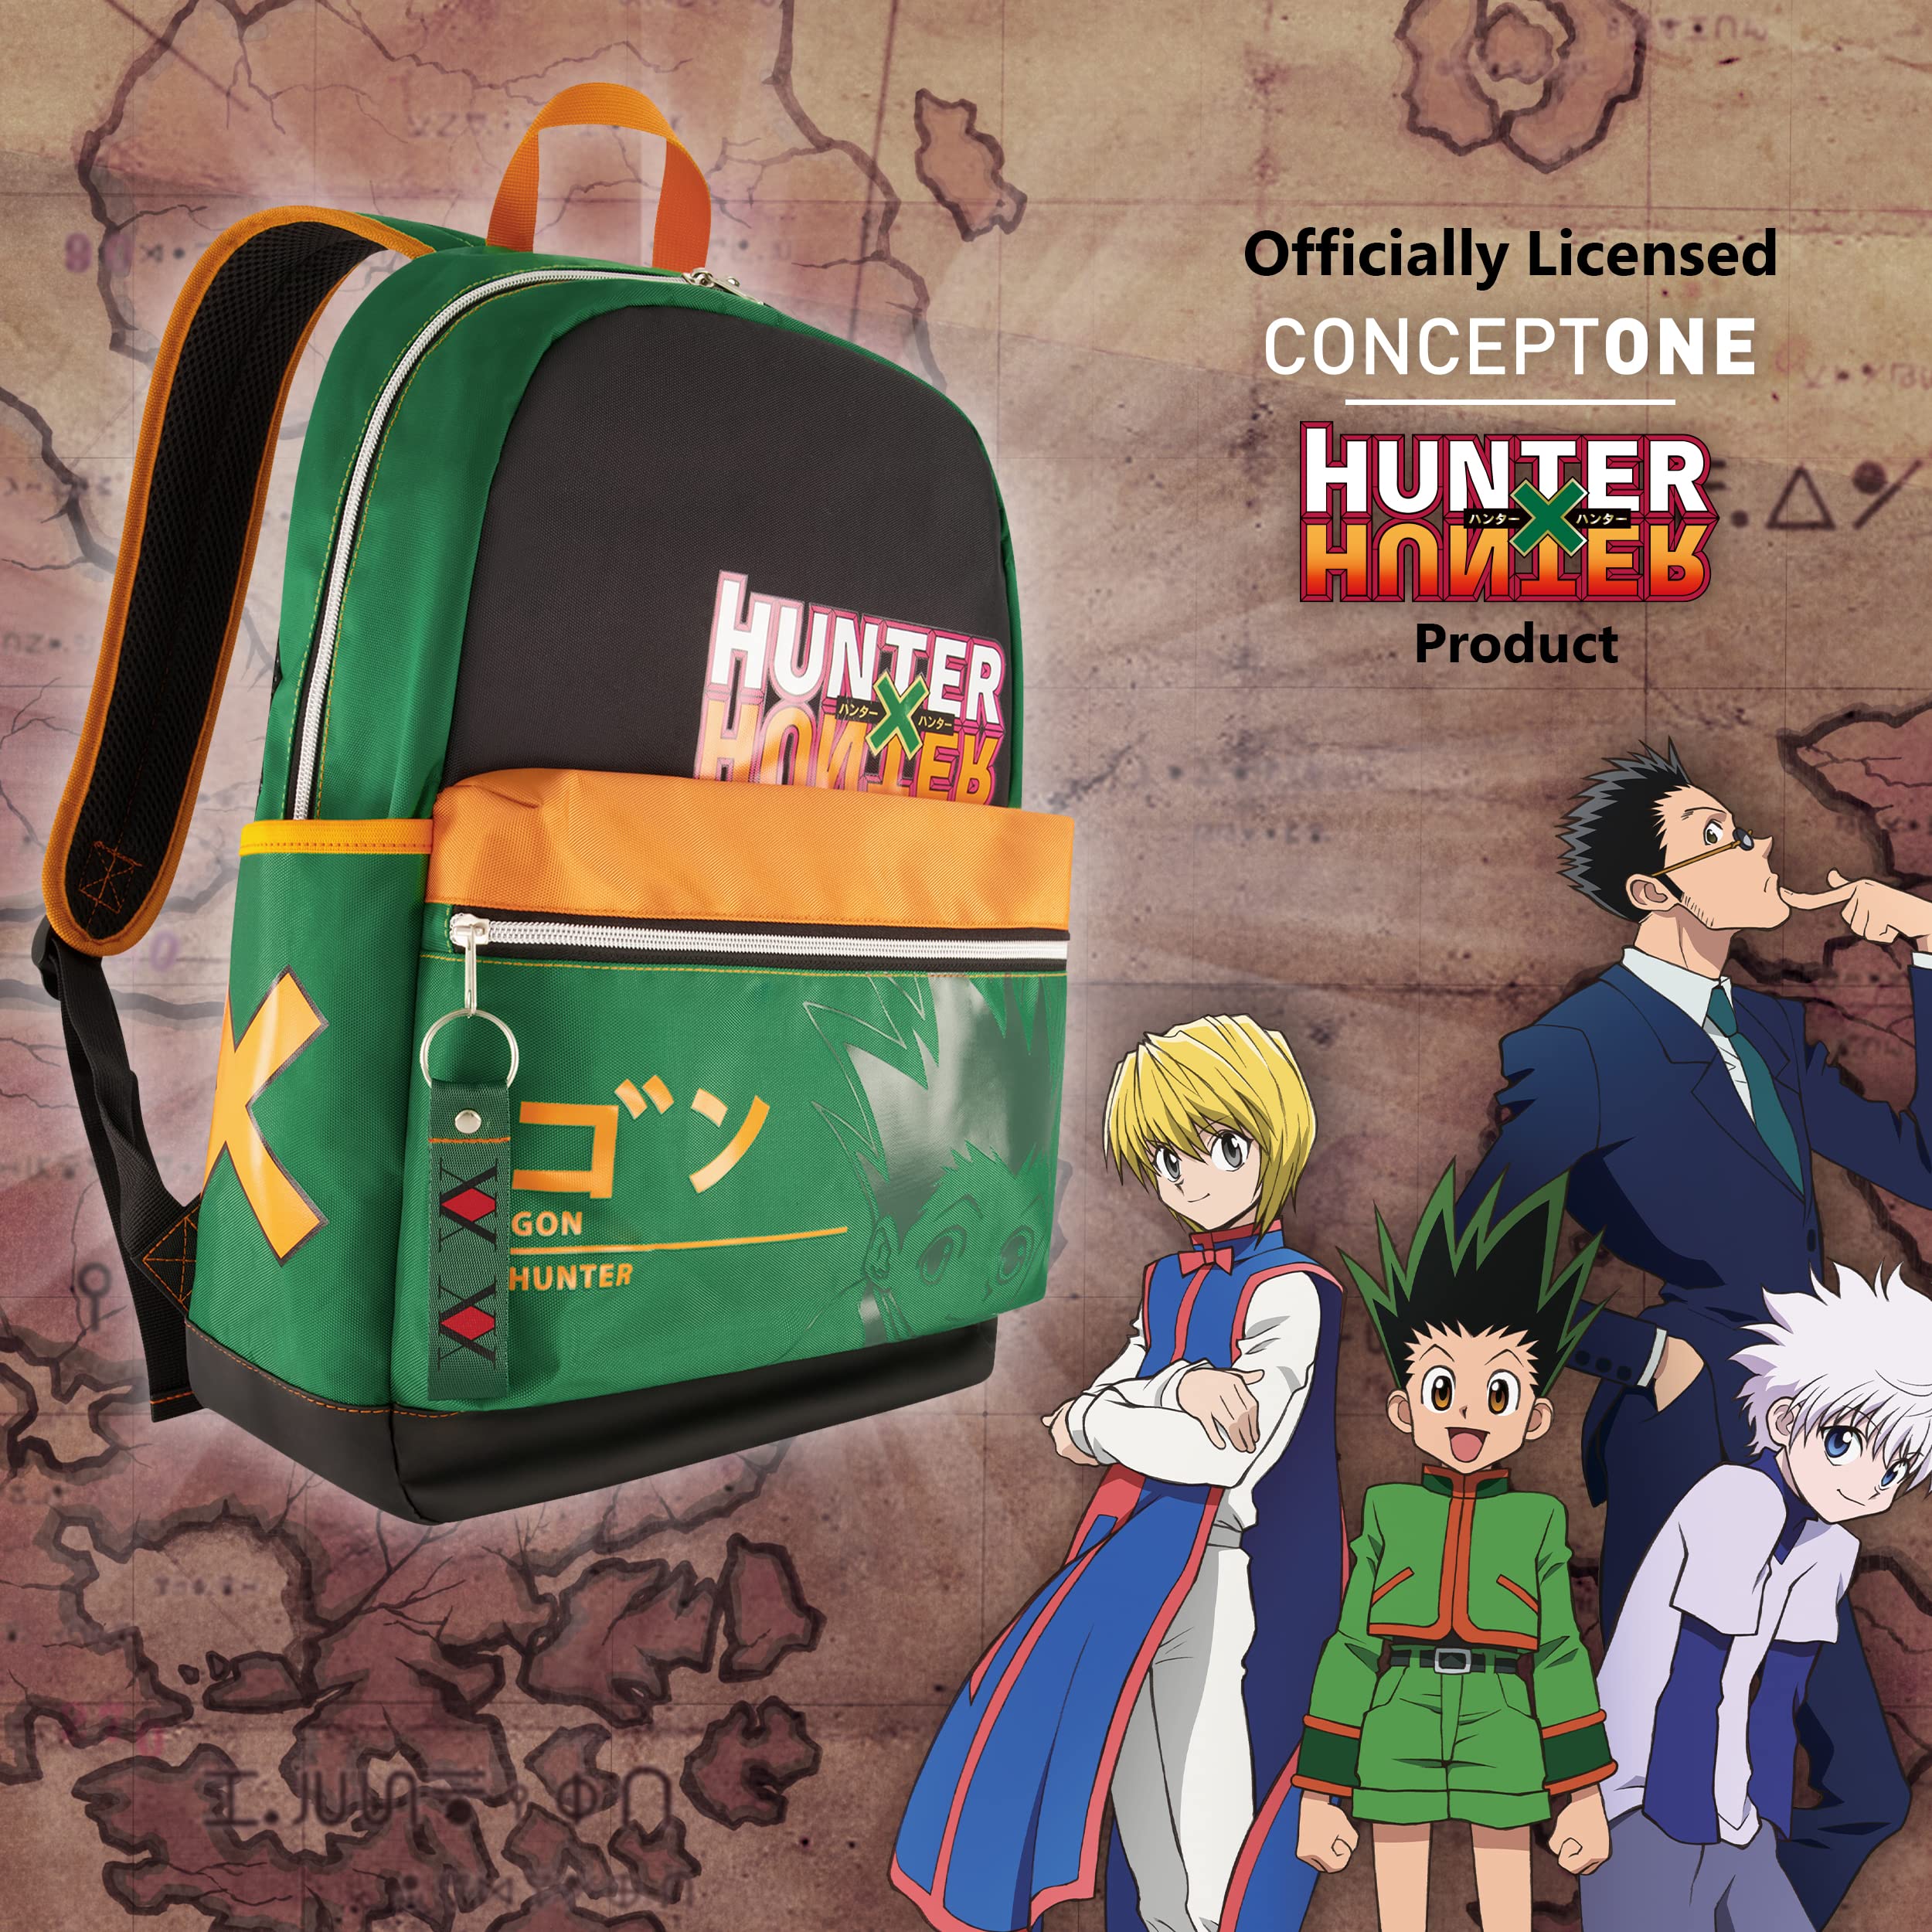 Hunter x Hunter 13 Inch Sleeve Laptop Backpack, Padded Computer Bag for Commute or Travel, Green